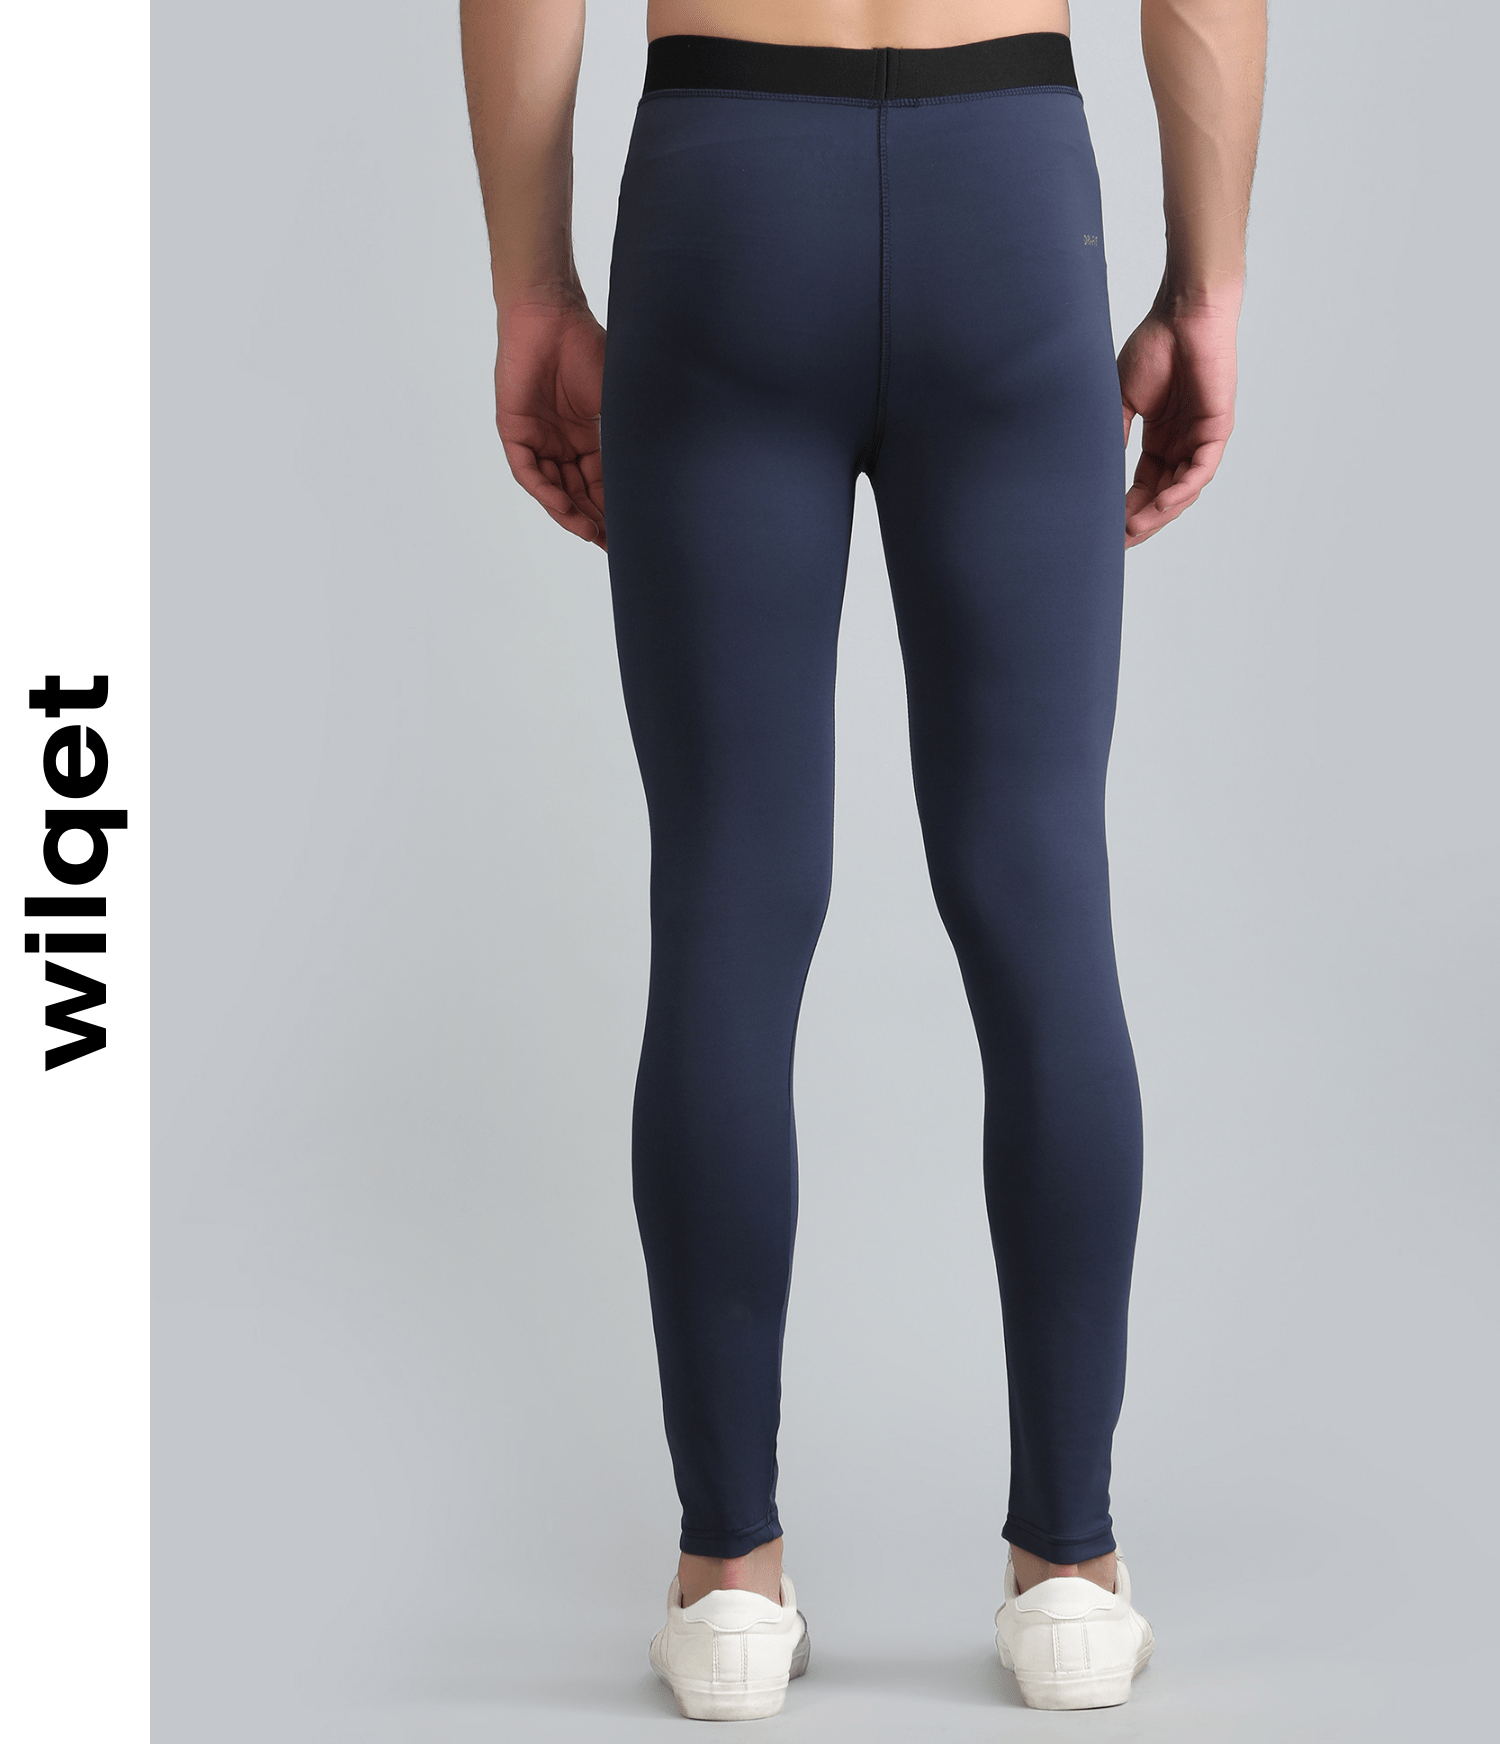 Stay comfortable and stylish with Nike Men's Track Tights